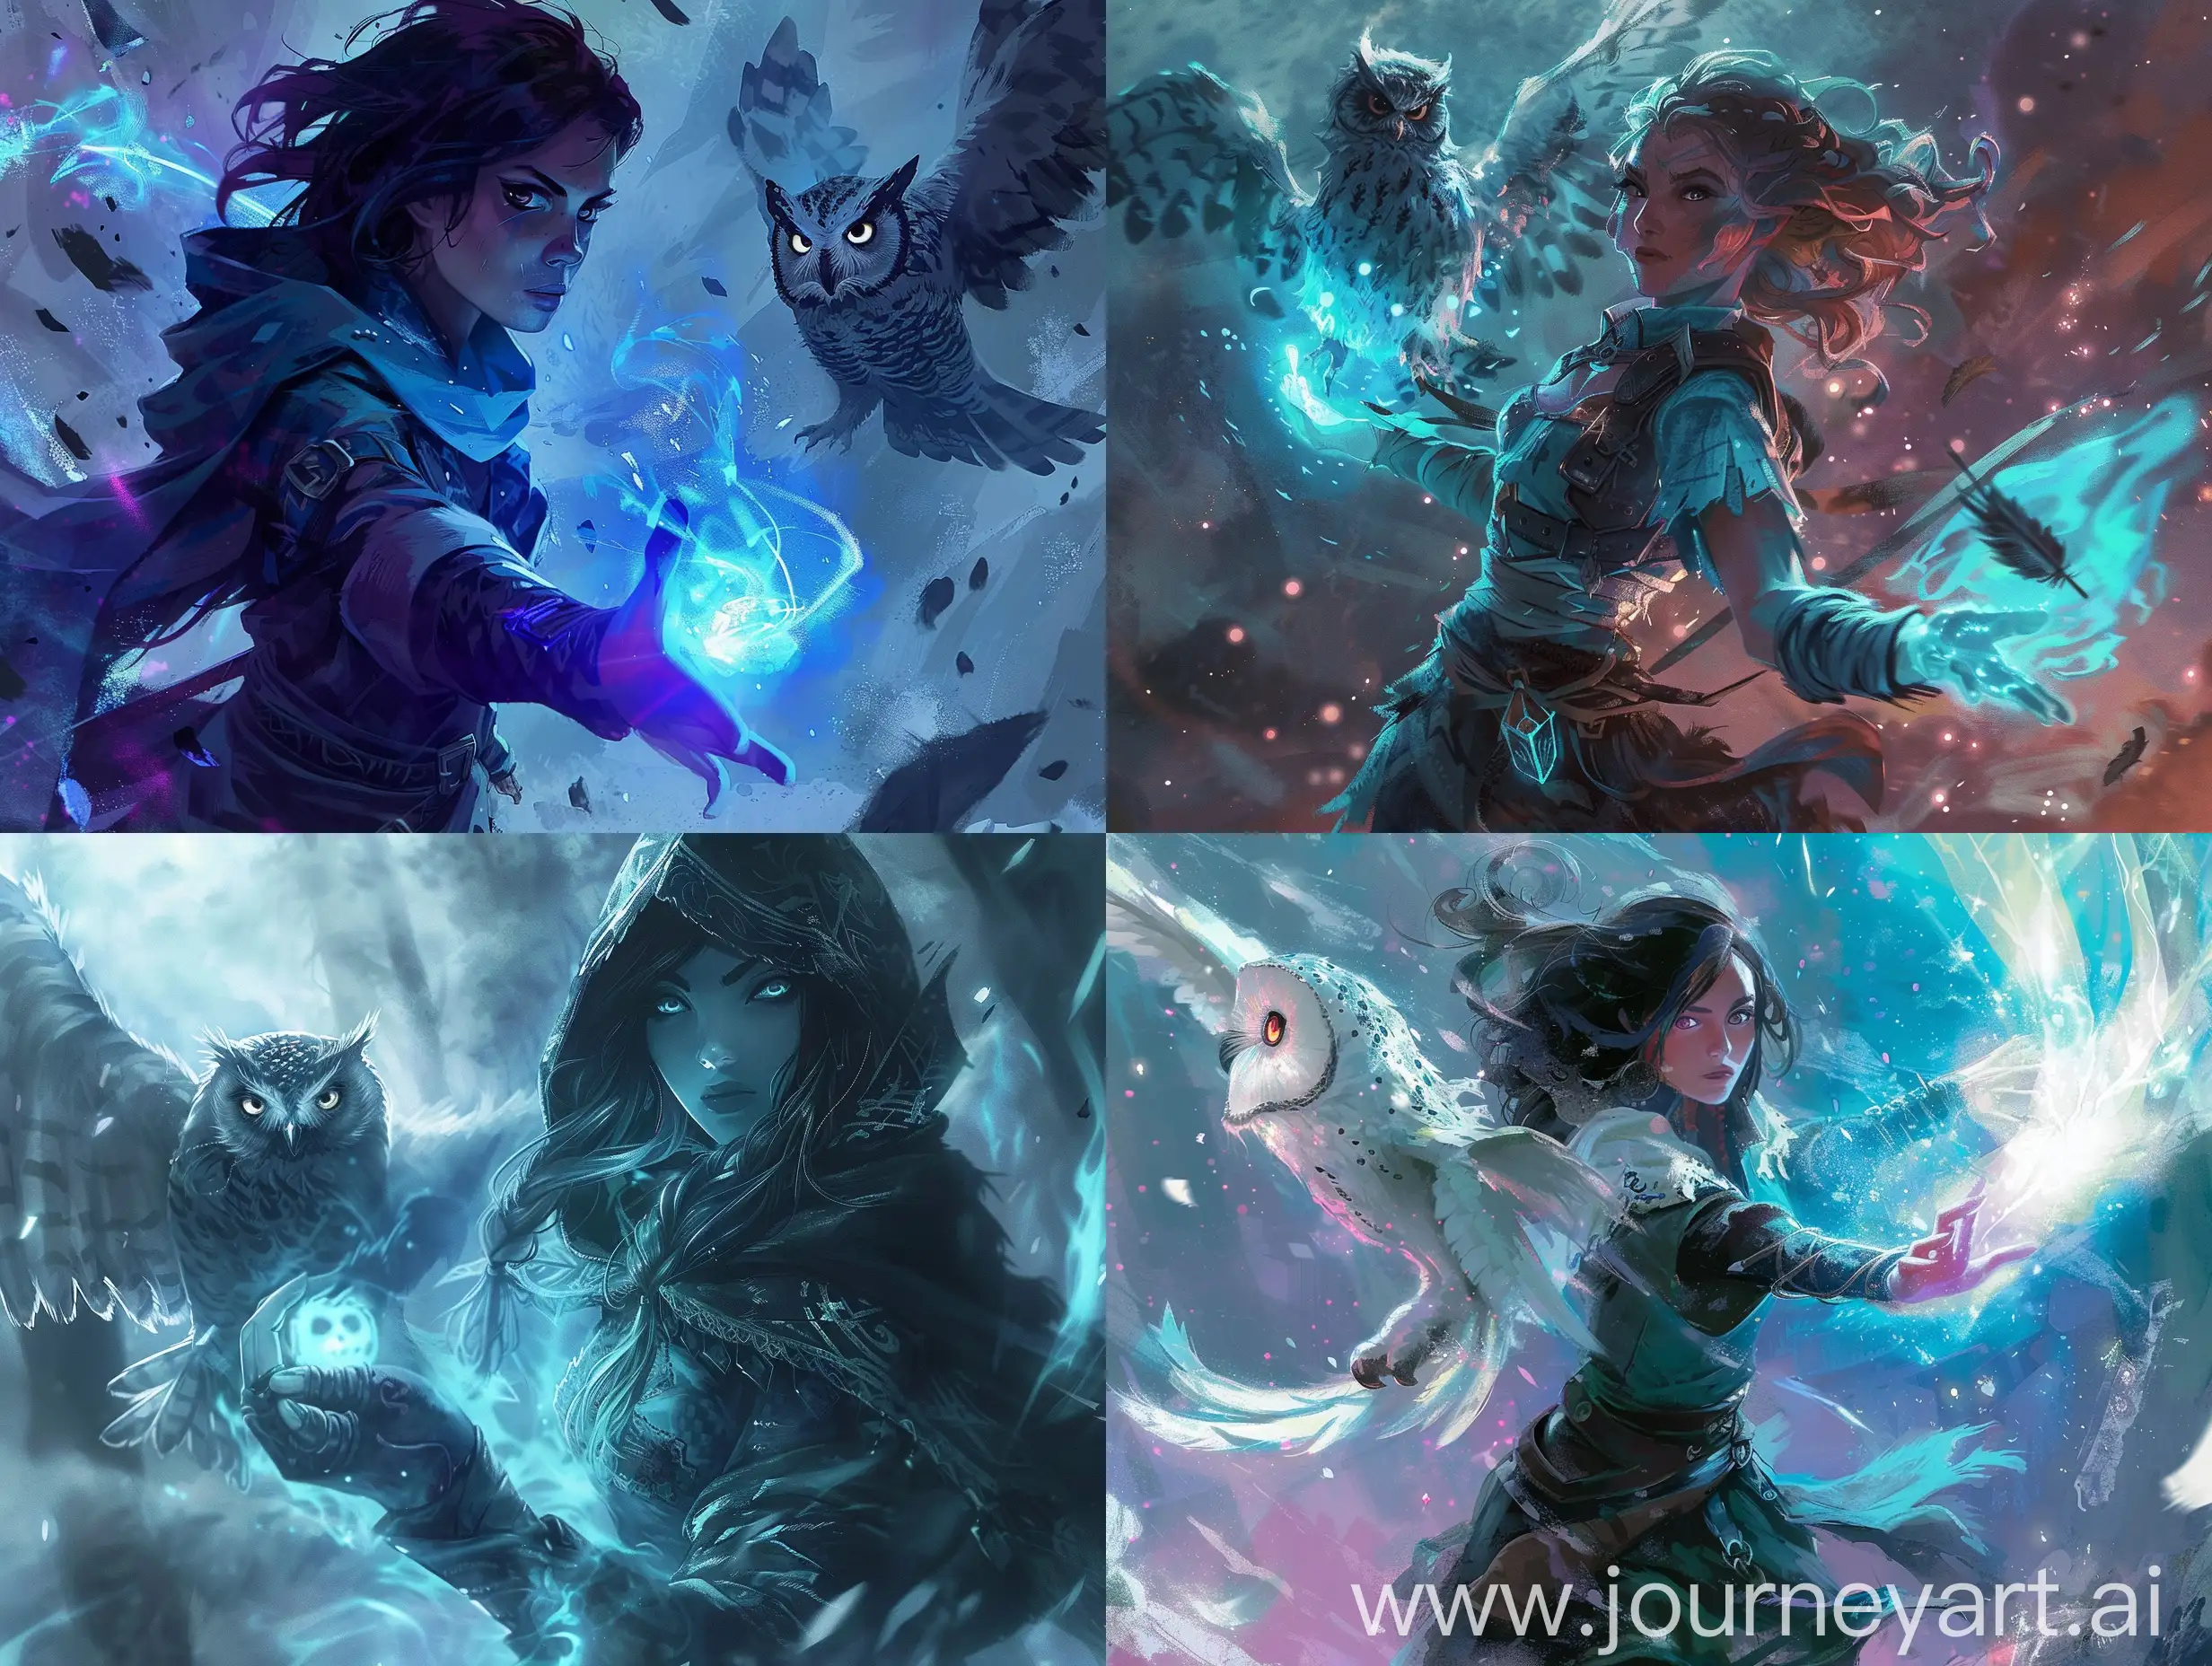 Mage girl with a spirit glowing owl leage of legends splash art style
